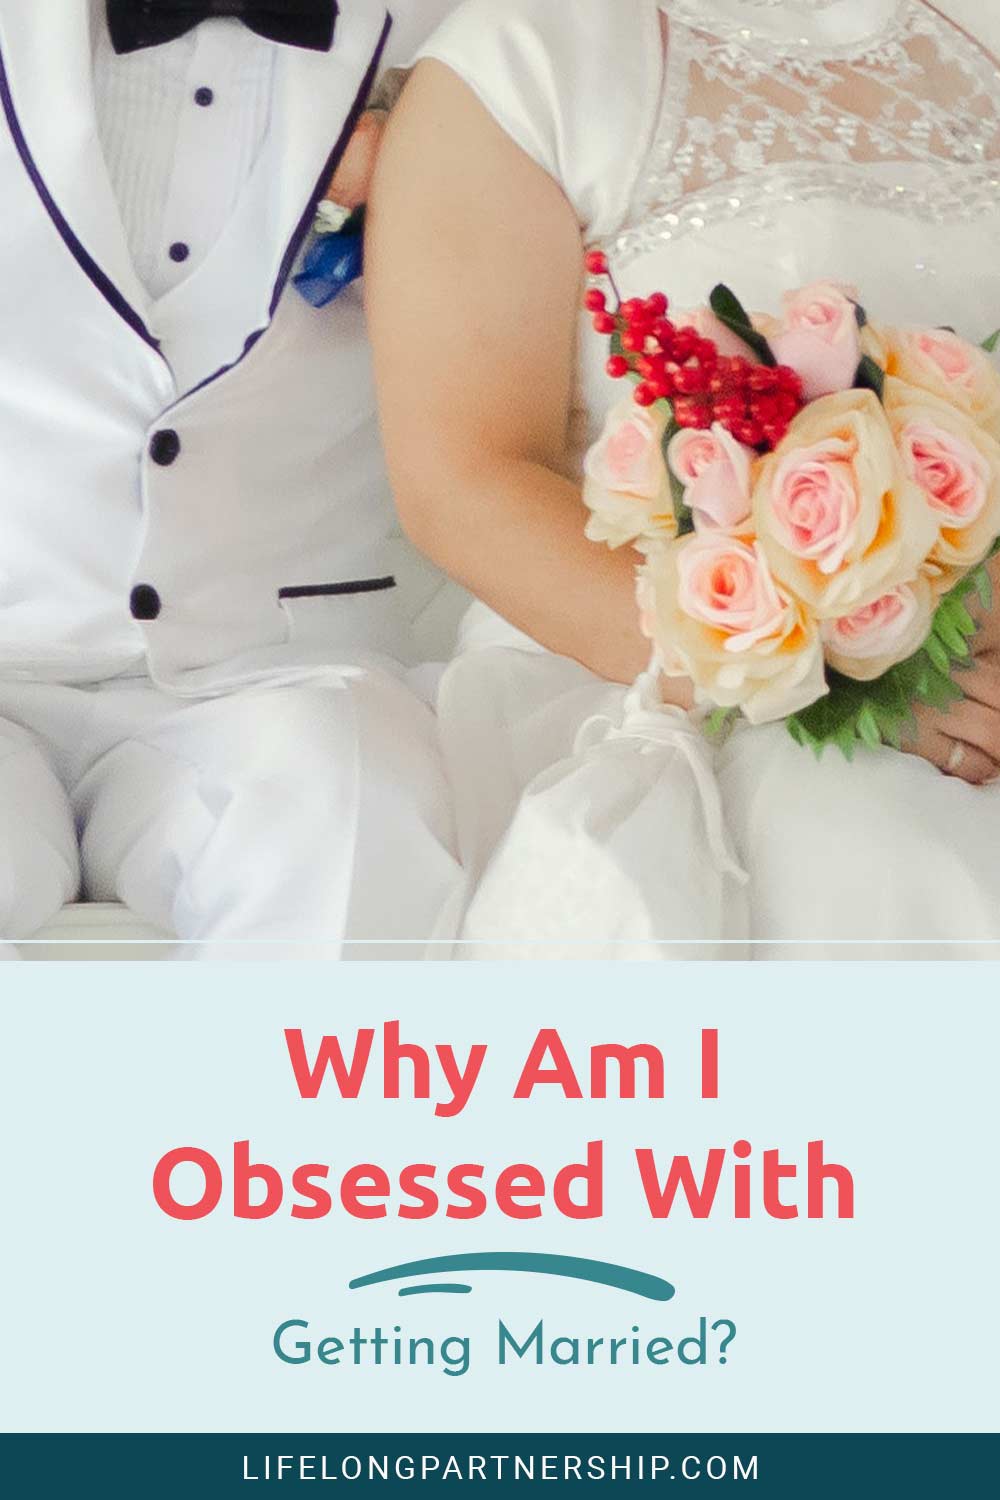 Why Am I Obsessed With Getting Married?